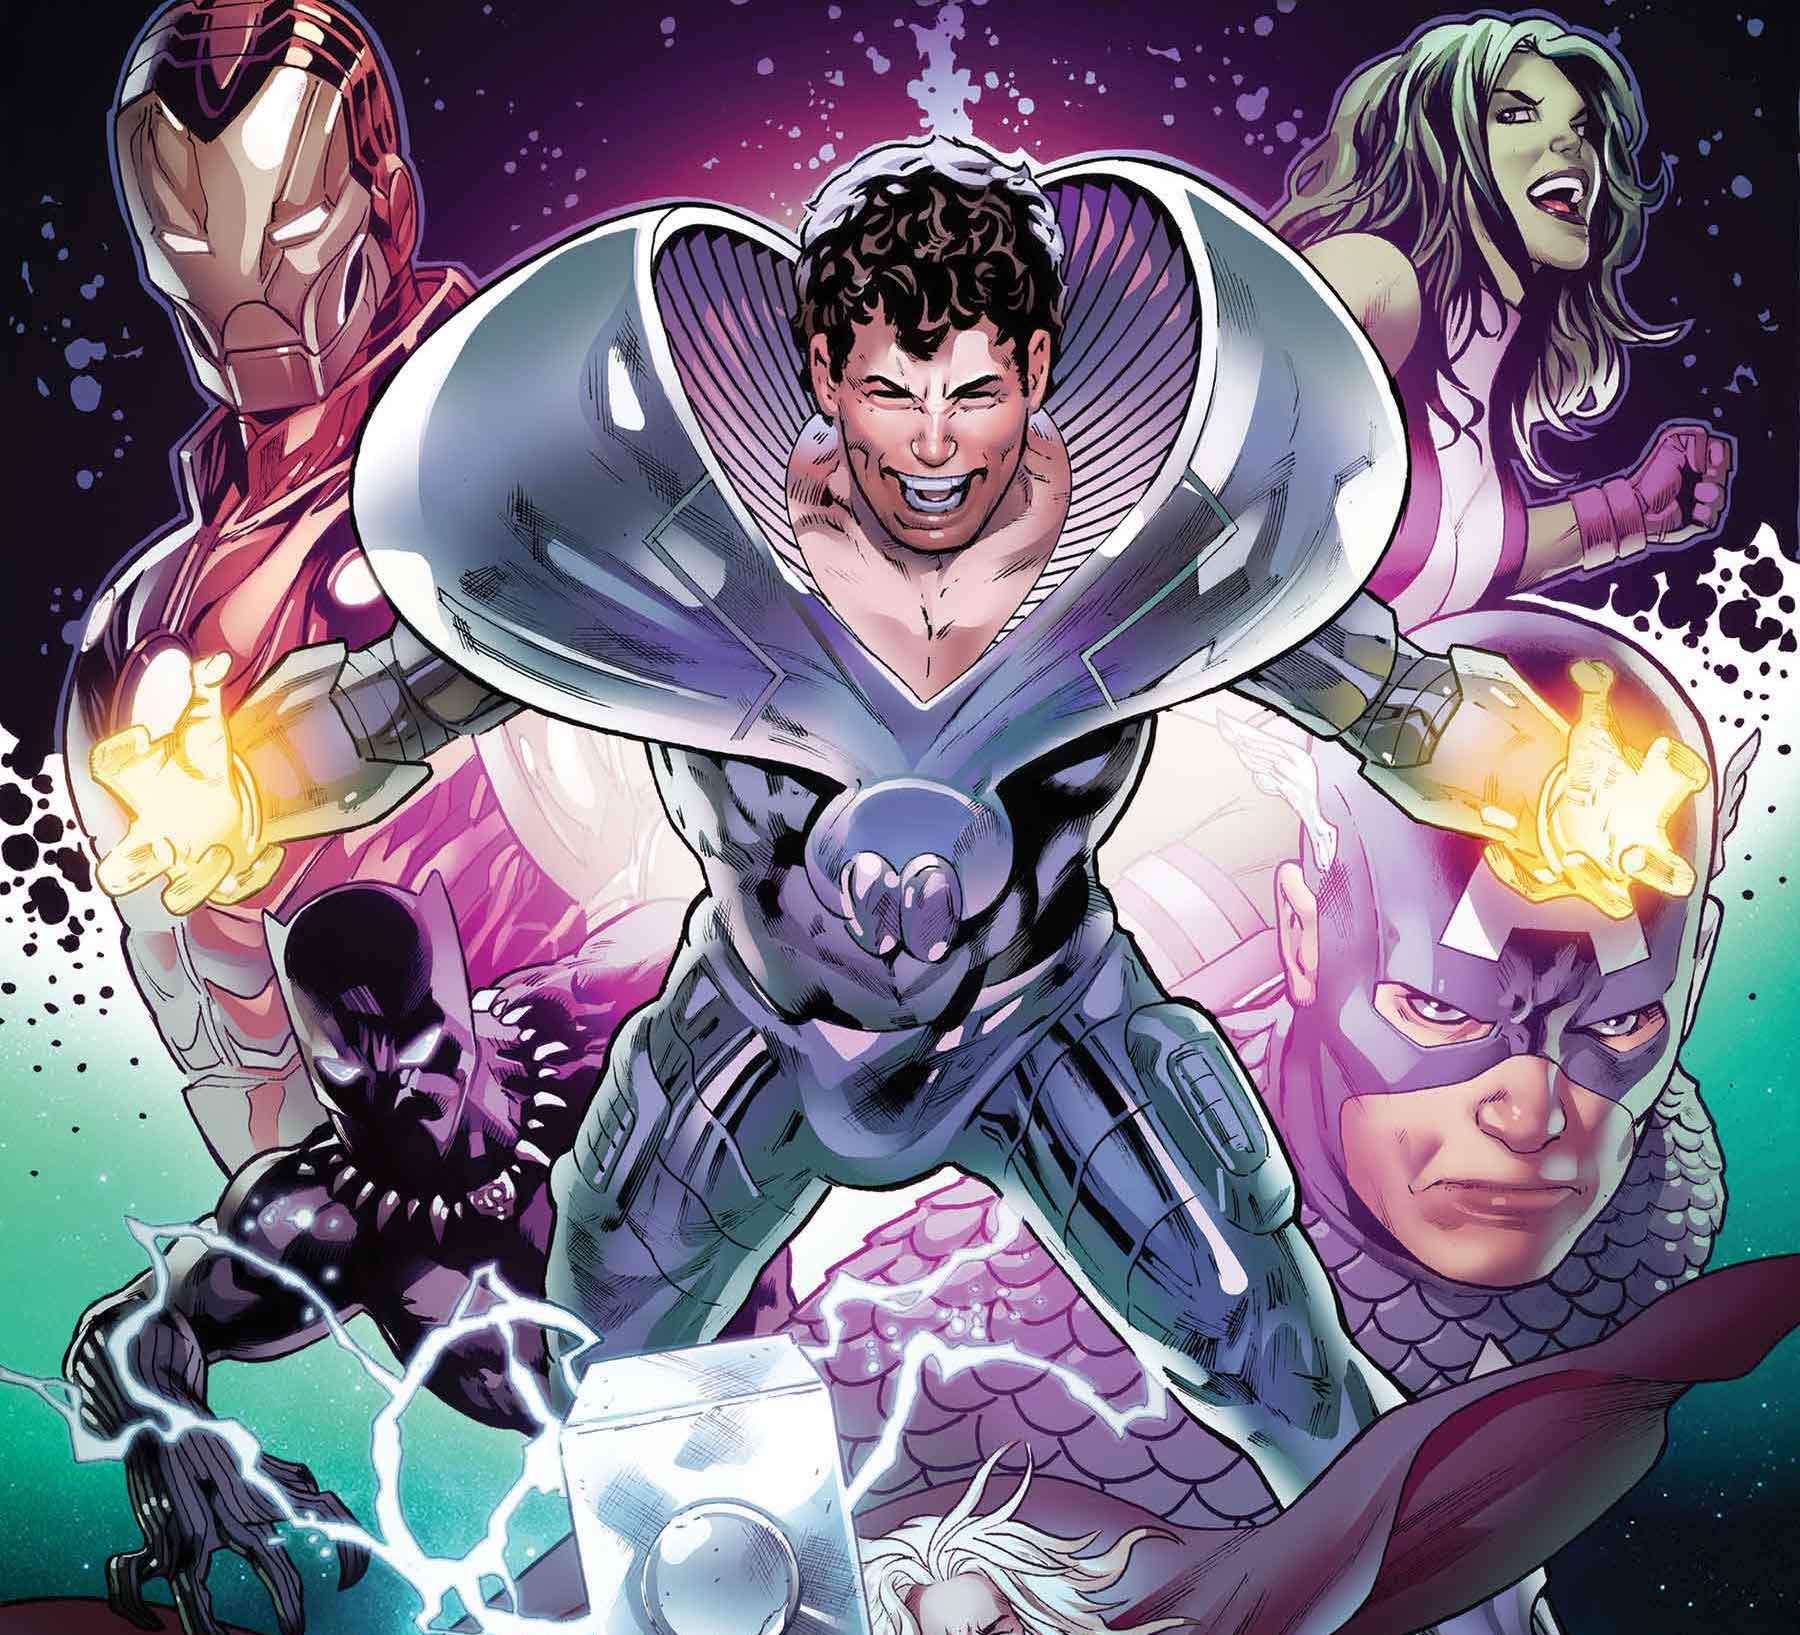 Something big is coming to Marvel in 'Avengers Beyond' #1 out March 2023